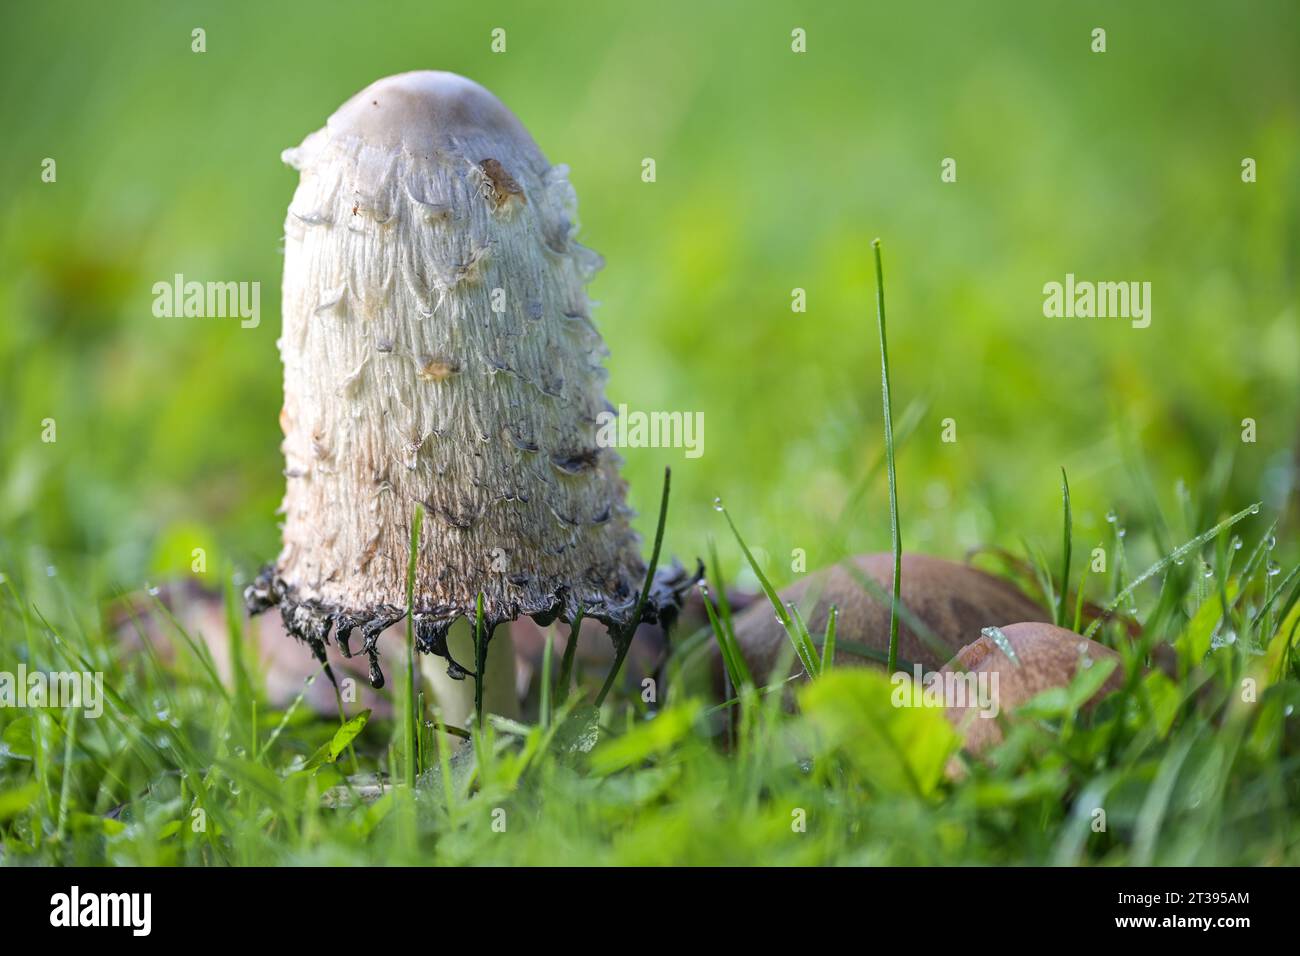 Shaggy ink cap mushroom (Coprinus comatus) growing in a green lawn, the gills beneath the white cap start to turn black and deliquesce into a liquid f Stock Photo